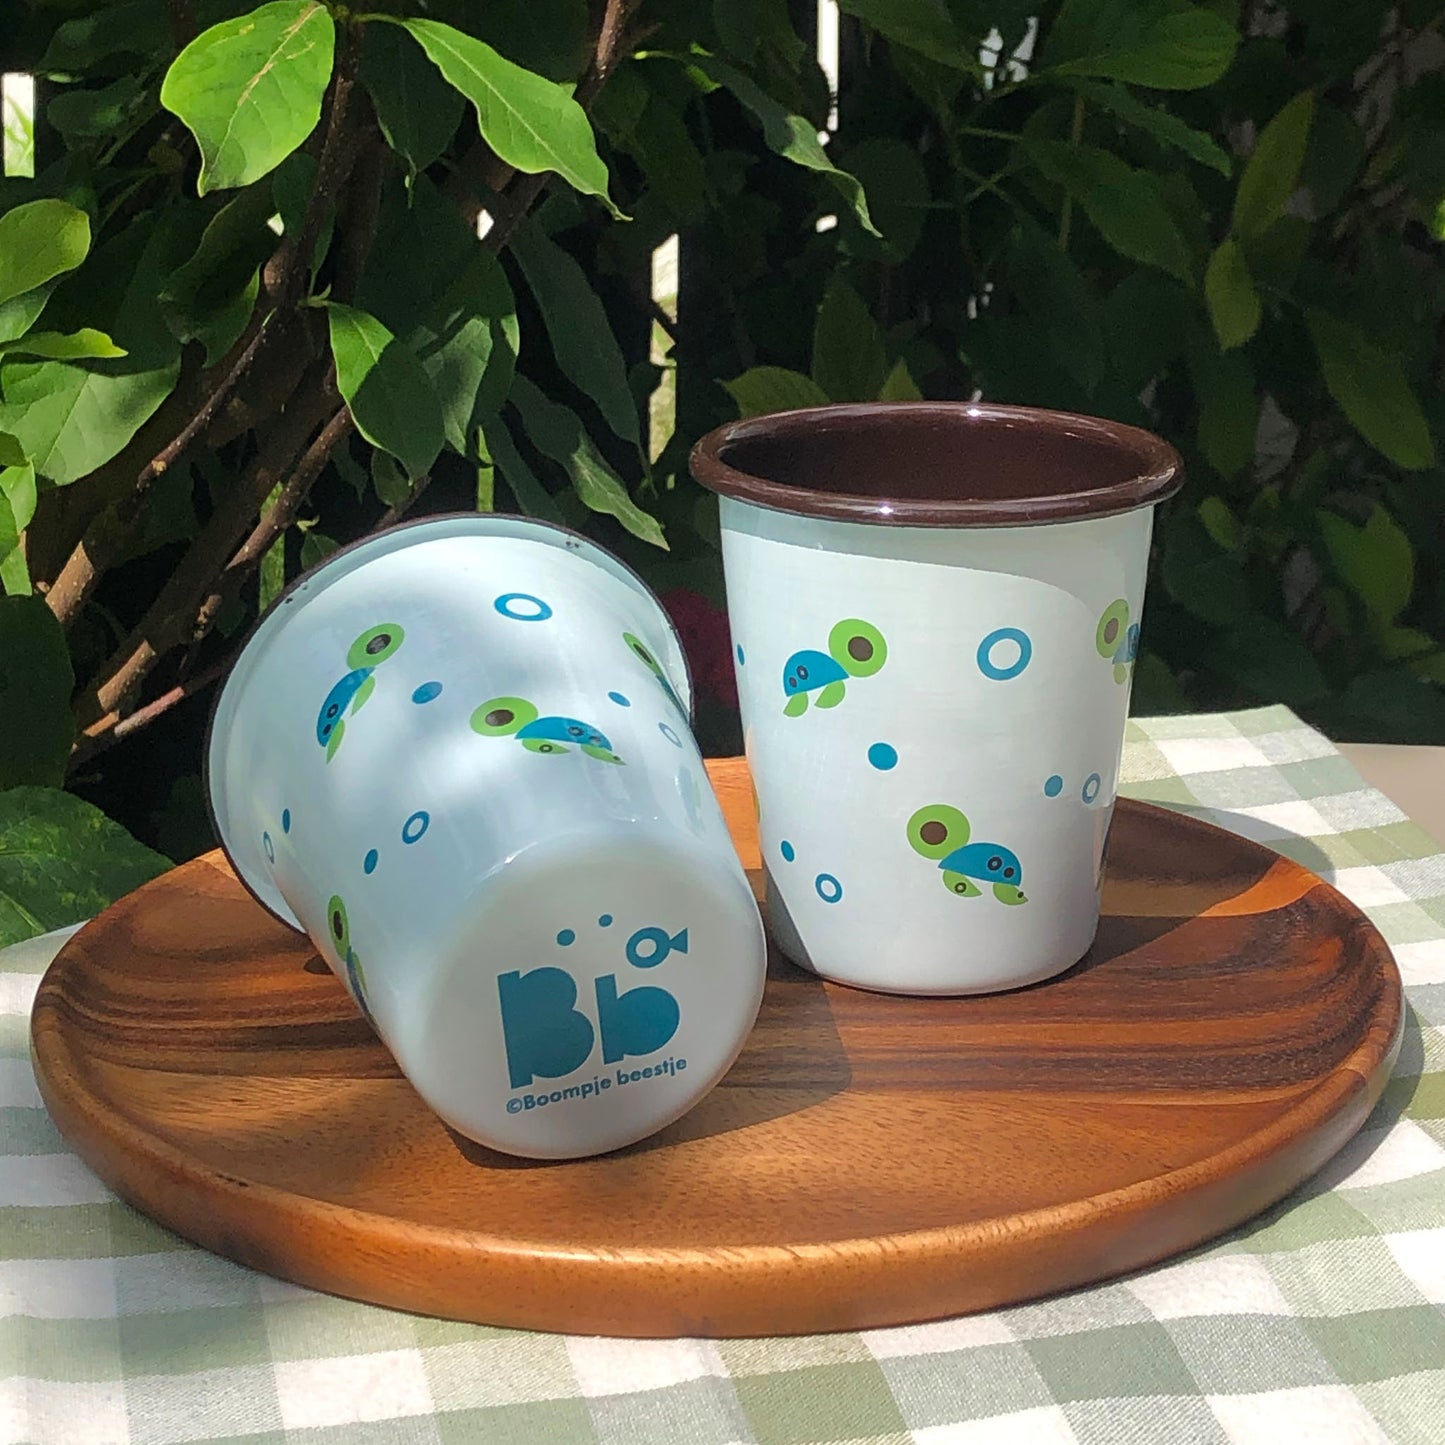 Pair of light blue cups with sea turtle design sits on a round wooden platter on a gingham green cloth. Surrounded by green leaves in the background.